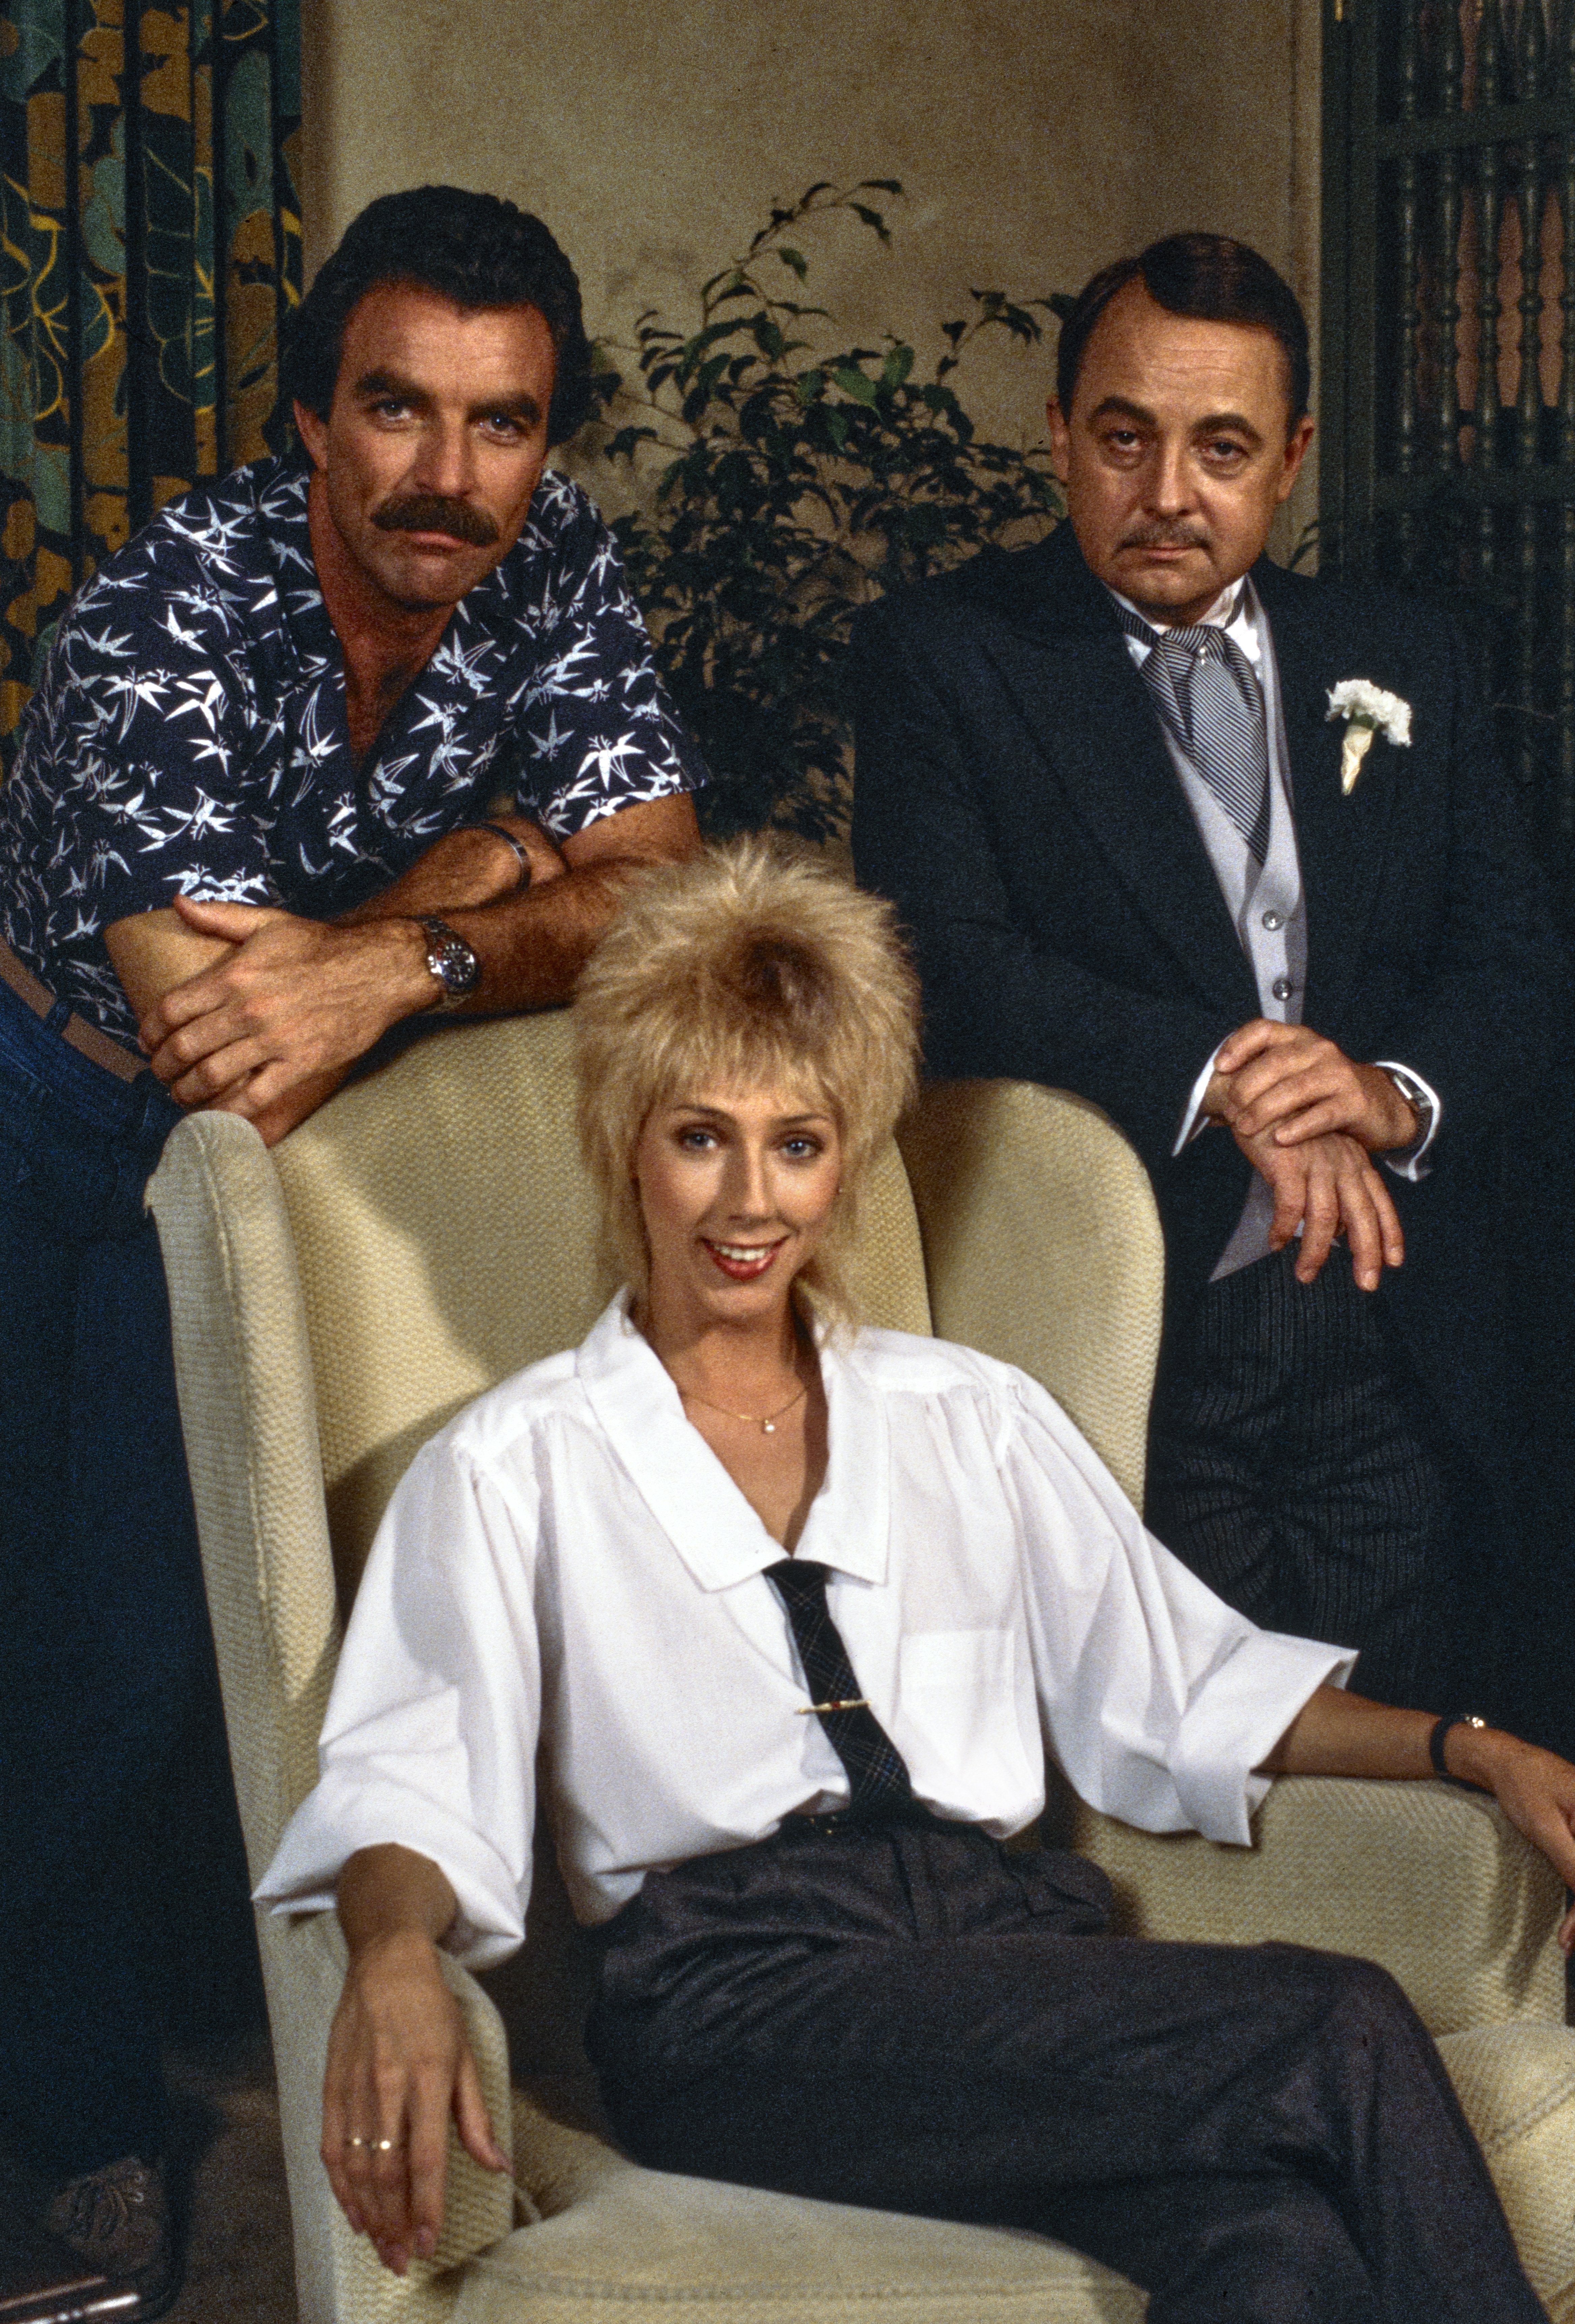 Tom Selleck, John Hillerman, and Jillie Mack on the set of "Magnum P.I."  on January 10, 1985 | Source: Getty Images